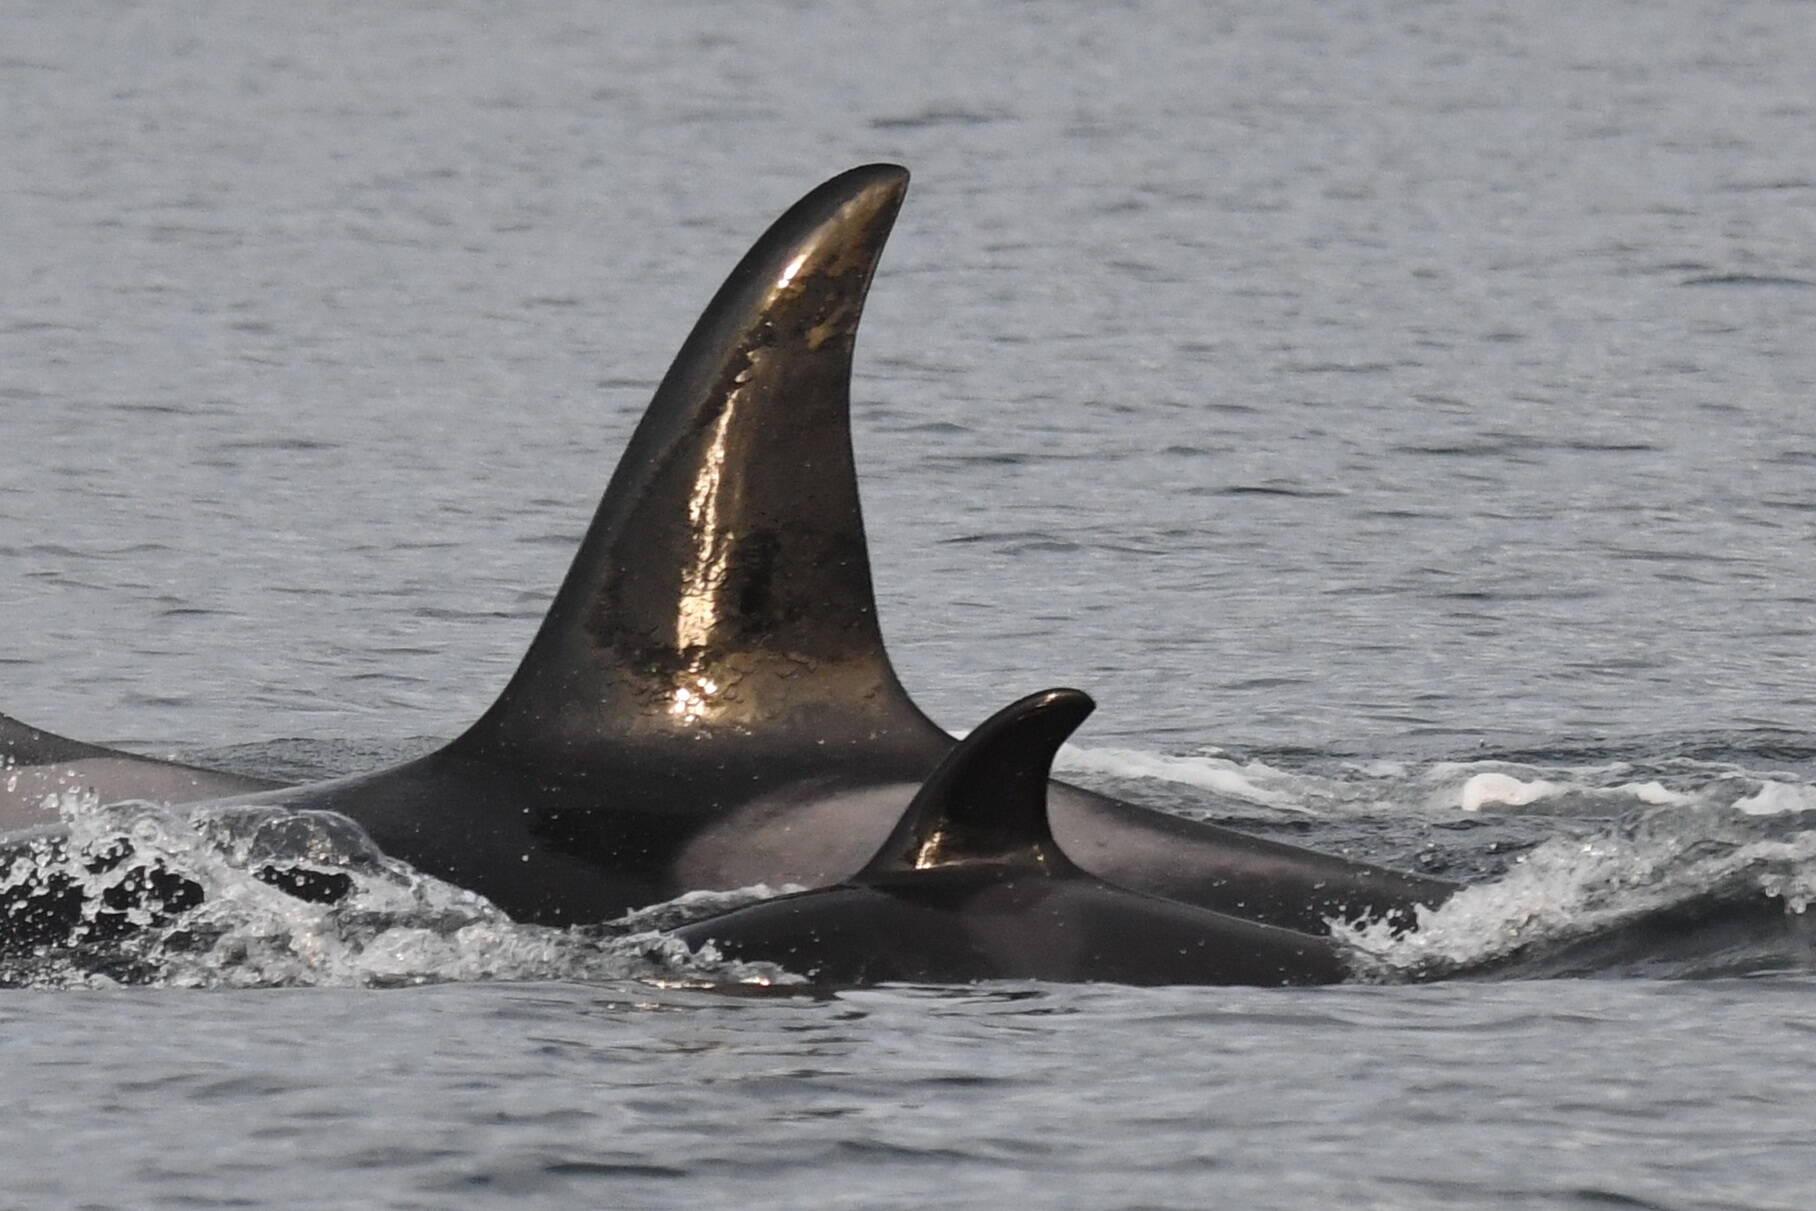 Contributed photo by the Center for Whale Research
Mother J37 with baby J59.